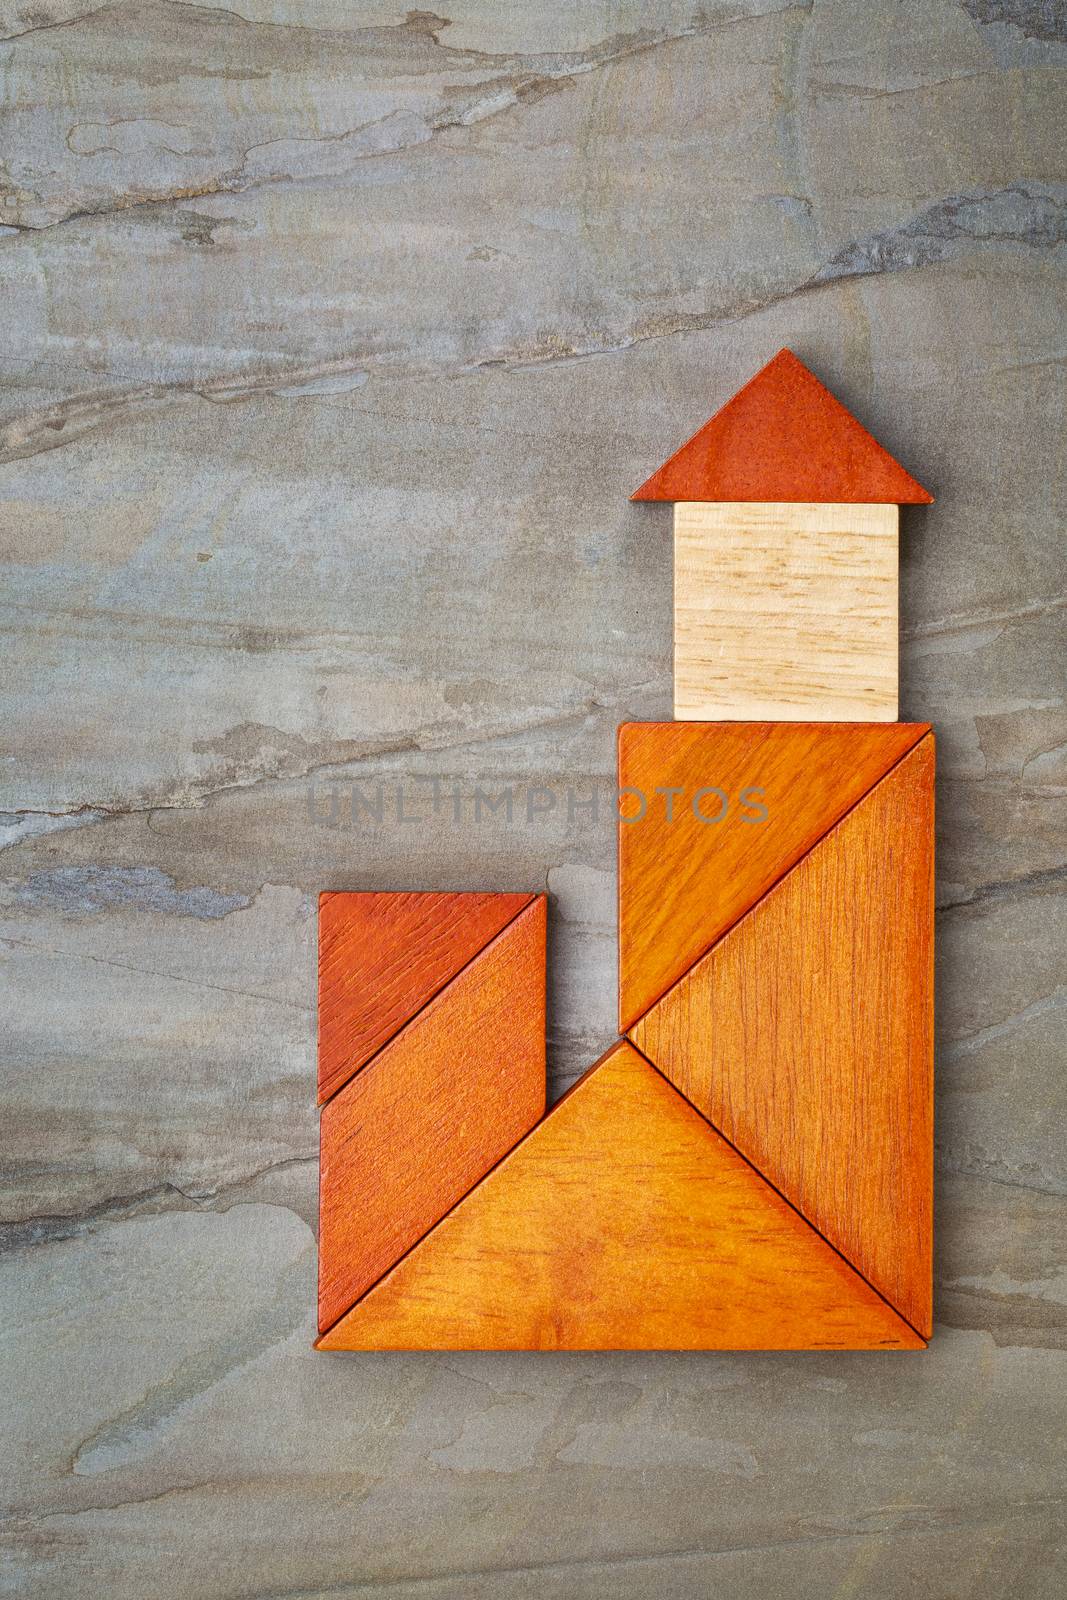 abstract lighthouse, house with a tower or church built from seven tangram wooden pieces, a traditional Chinese puzzle game, slate rock background, artwork created by the photographer